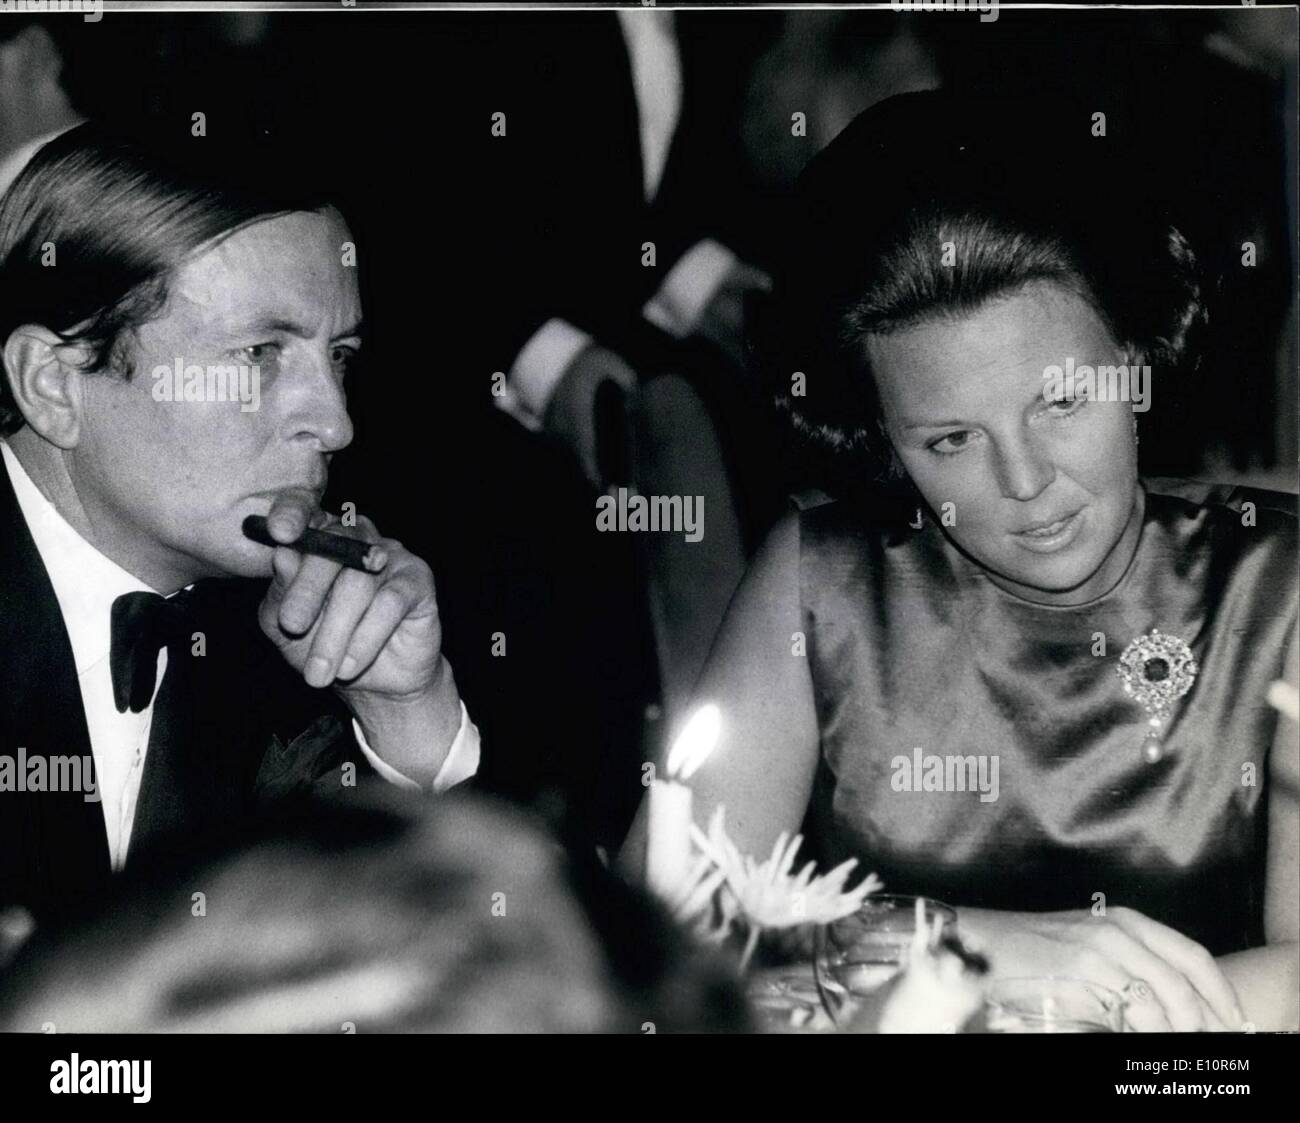 Oct. 10, 1973 - Flaming ball in Munich's Bayerischer Hof : prince Bernhard of the Netherlands, who is chairman of world wild life fund was host of beneficiary ball in Munich. To raise donations for the important mission saying the endangered wild life in africa, prime Bernhard invited the members of the international high society as well as prominent businessman. politicians and stares of the show business. More than 500 illustrious guests attended the flamingo ball, They were entertainer by ''The voice of Prague''. Karel Gott, blues singer Donna high-tower and the ''Les Humphries singers Stock Photo